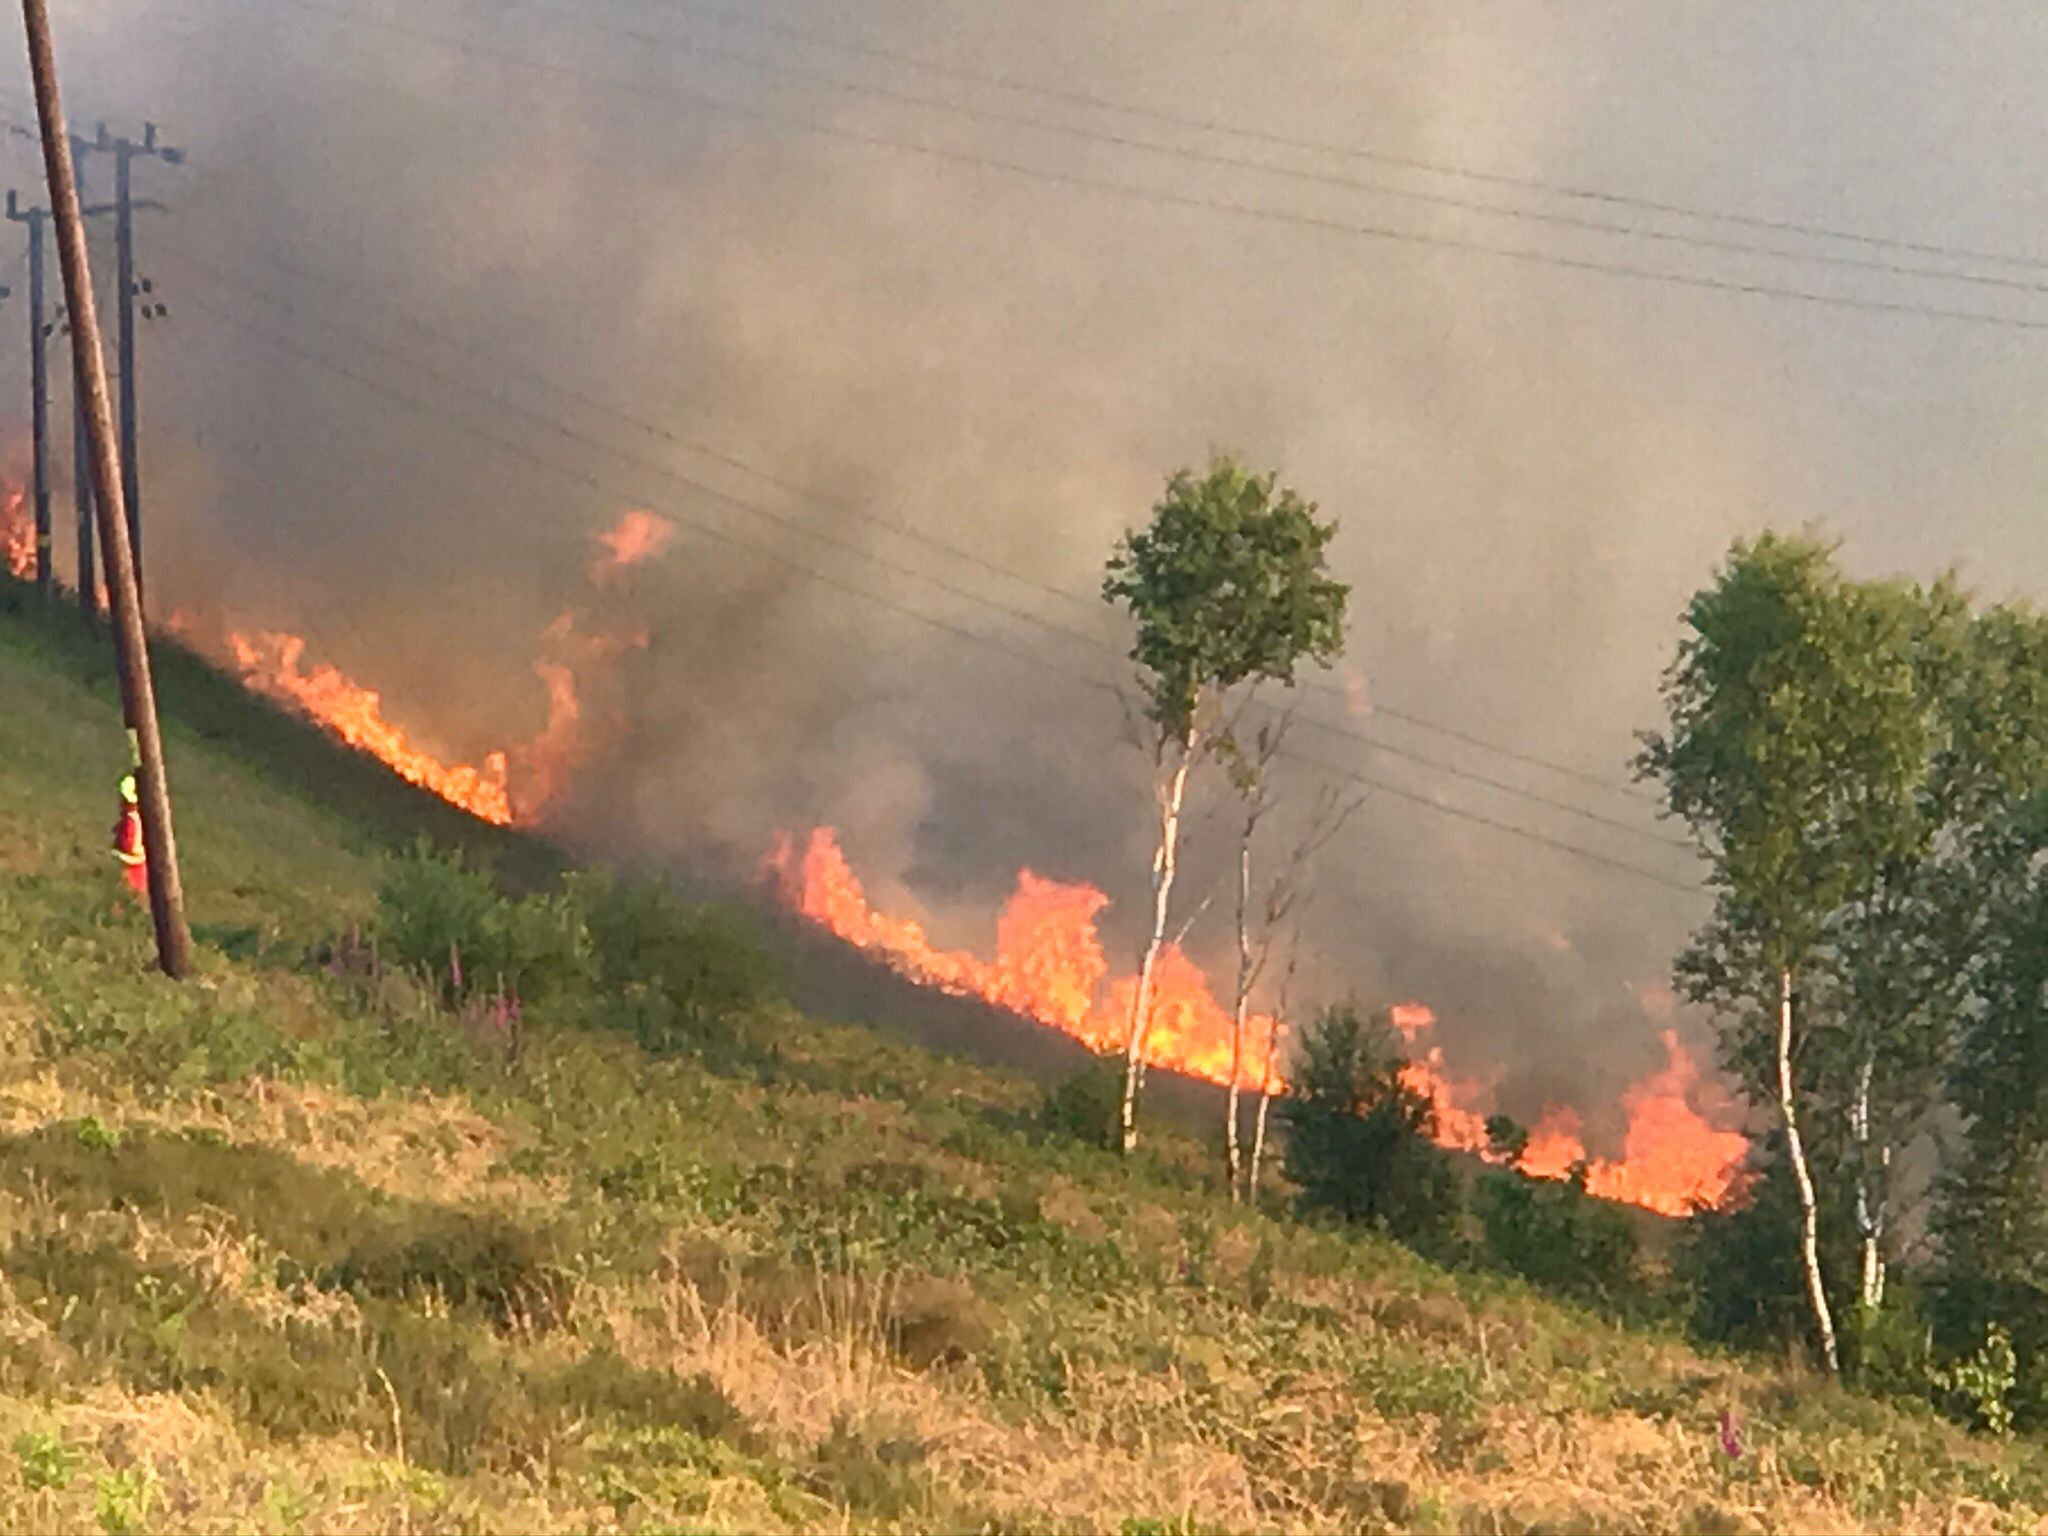 A wildfire breaks out in the Rhondda Valley in south Wales